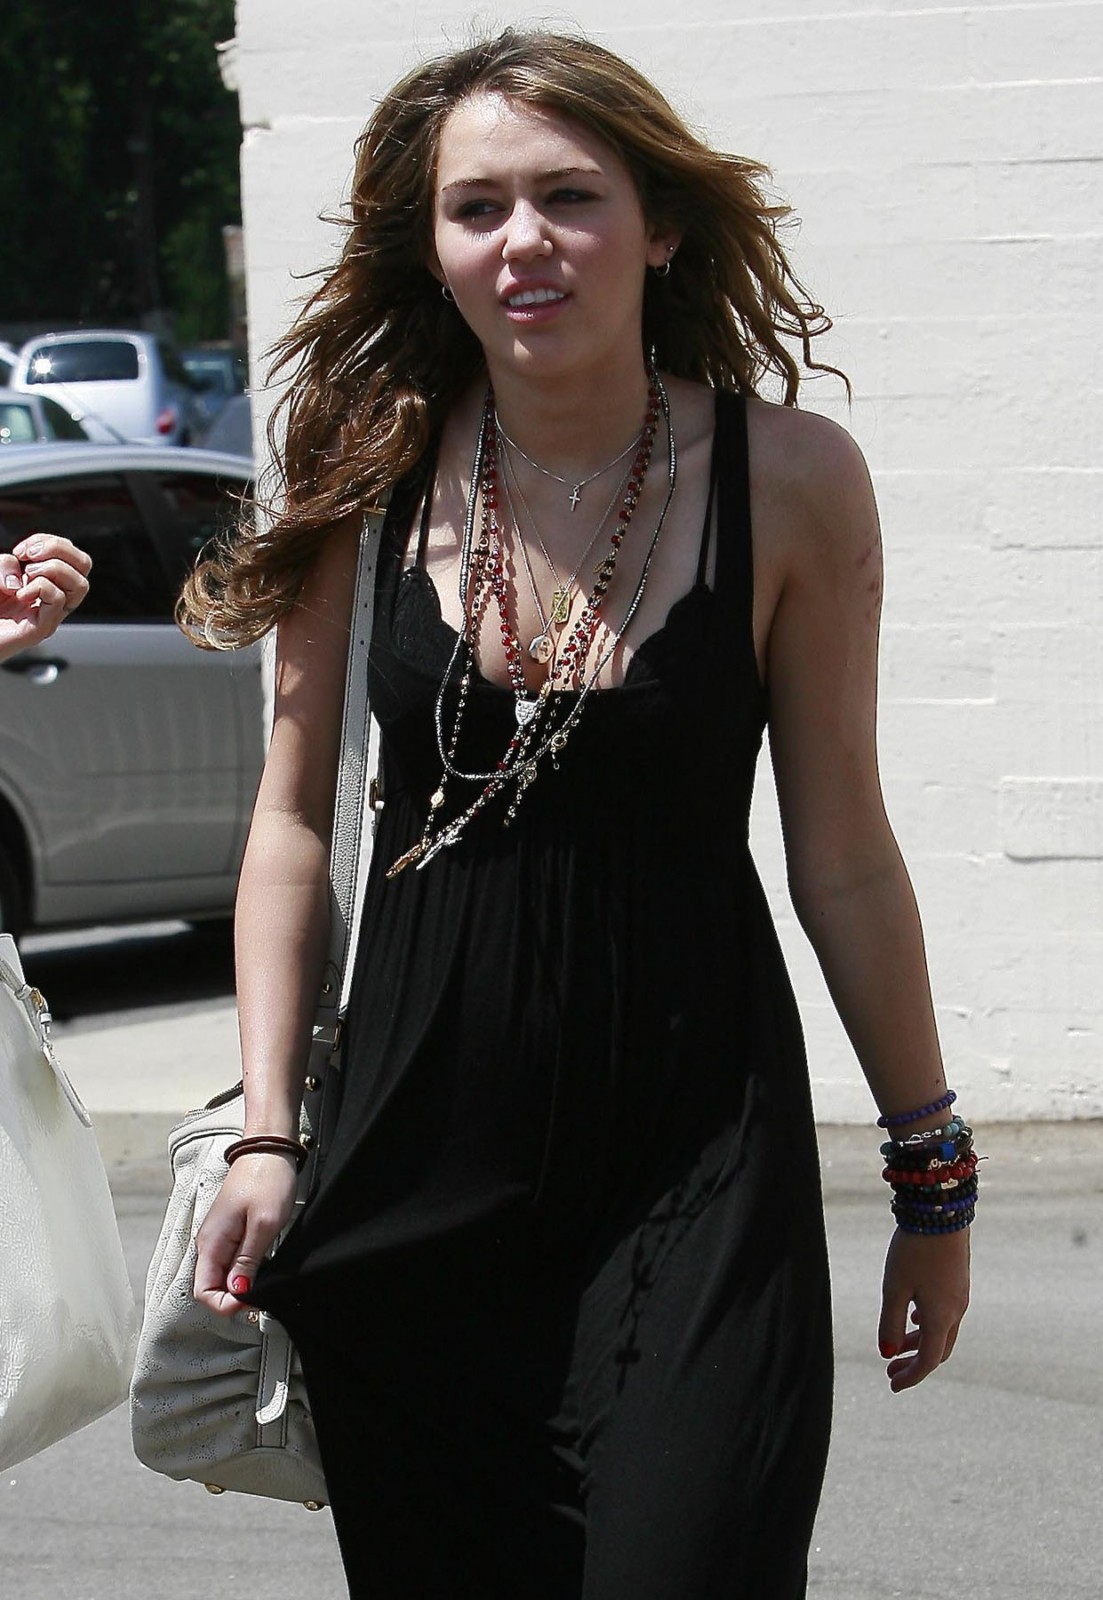 Miley-Cyrus-20090831_Out-n-About-Studio-City_May09_11981-1103x1600.jpg